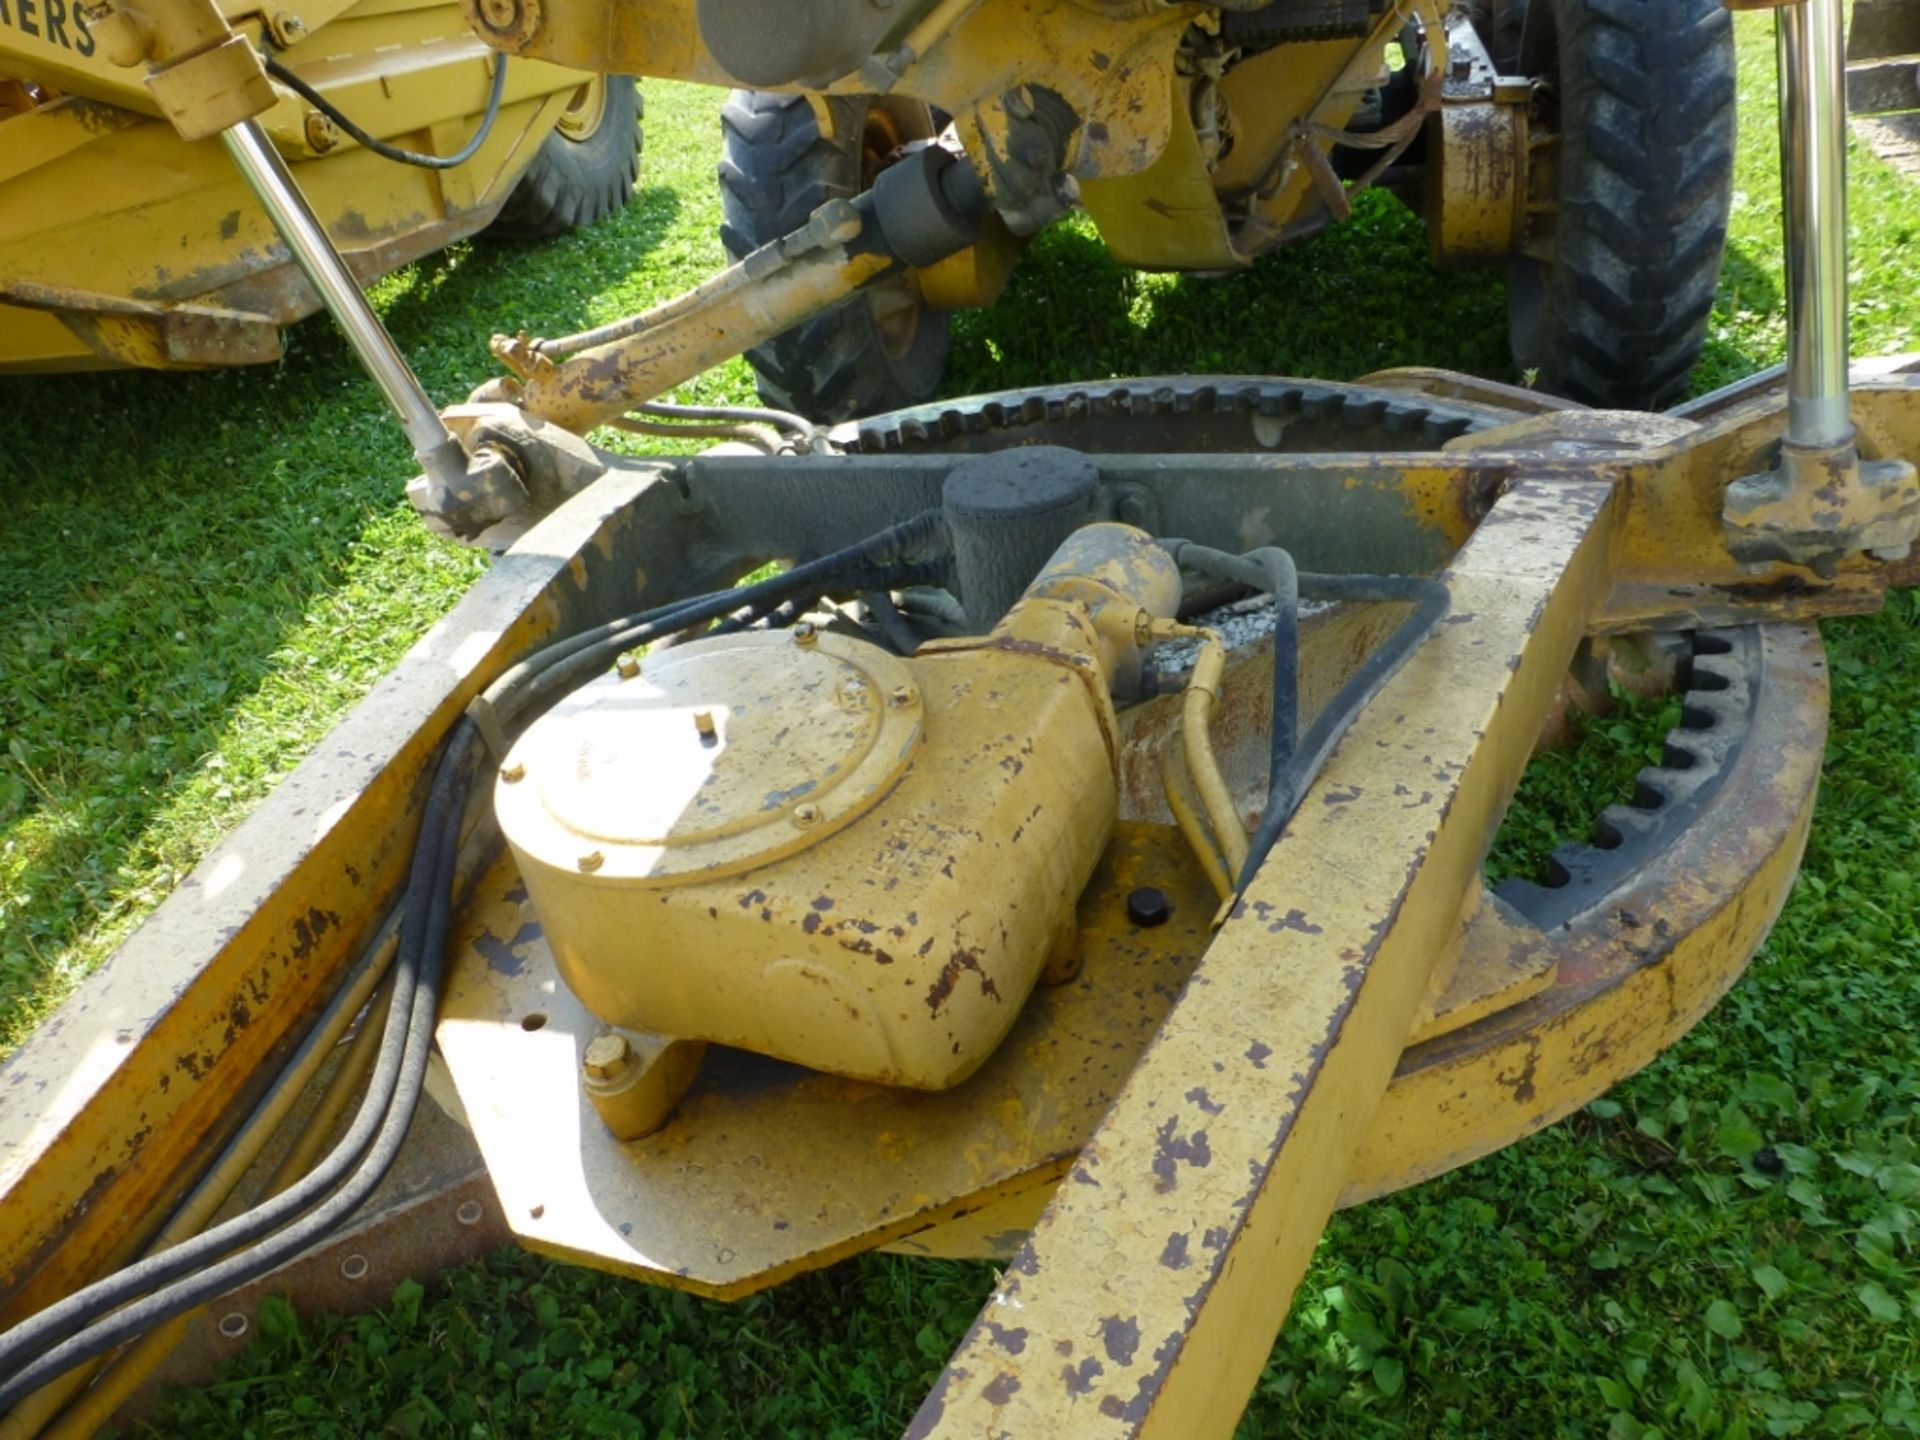 Caterpillar 120G motor grader with 13'10" moldboard se:87v871. Power shift. 7720 unverified hrs. - Image 17 of 27